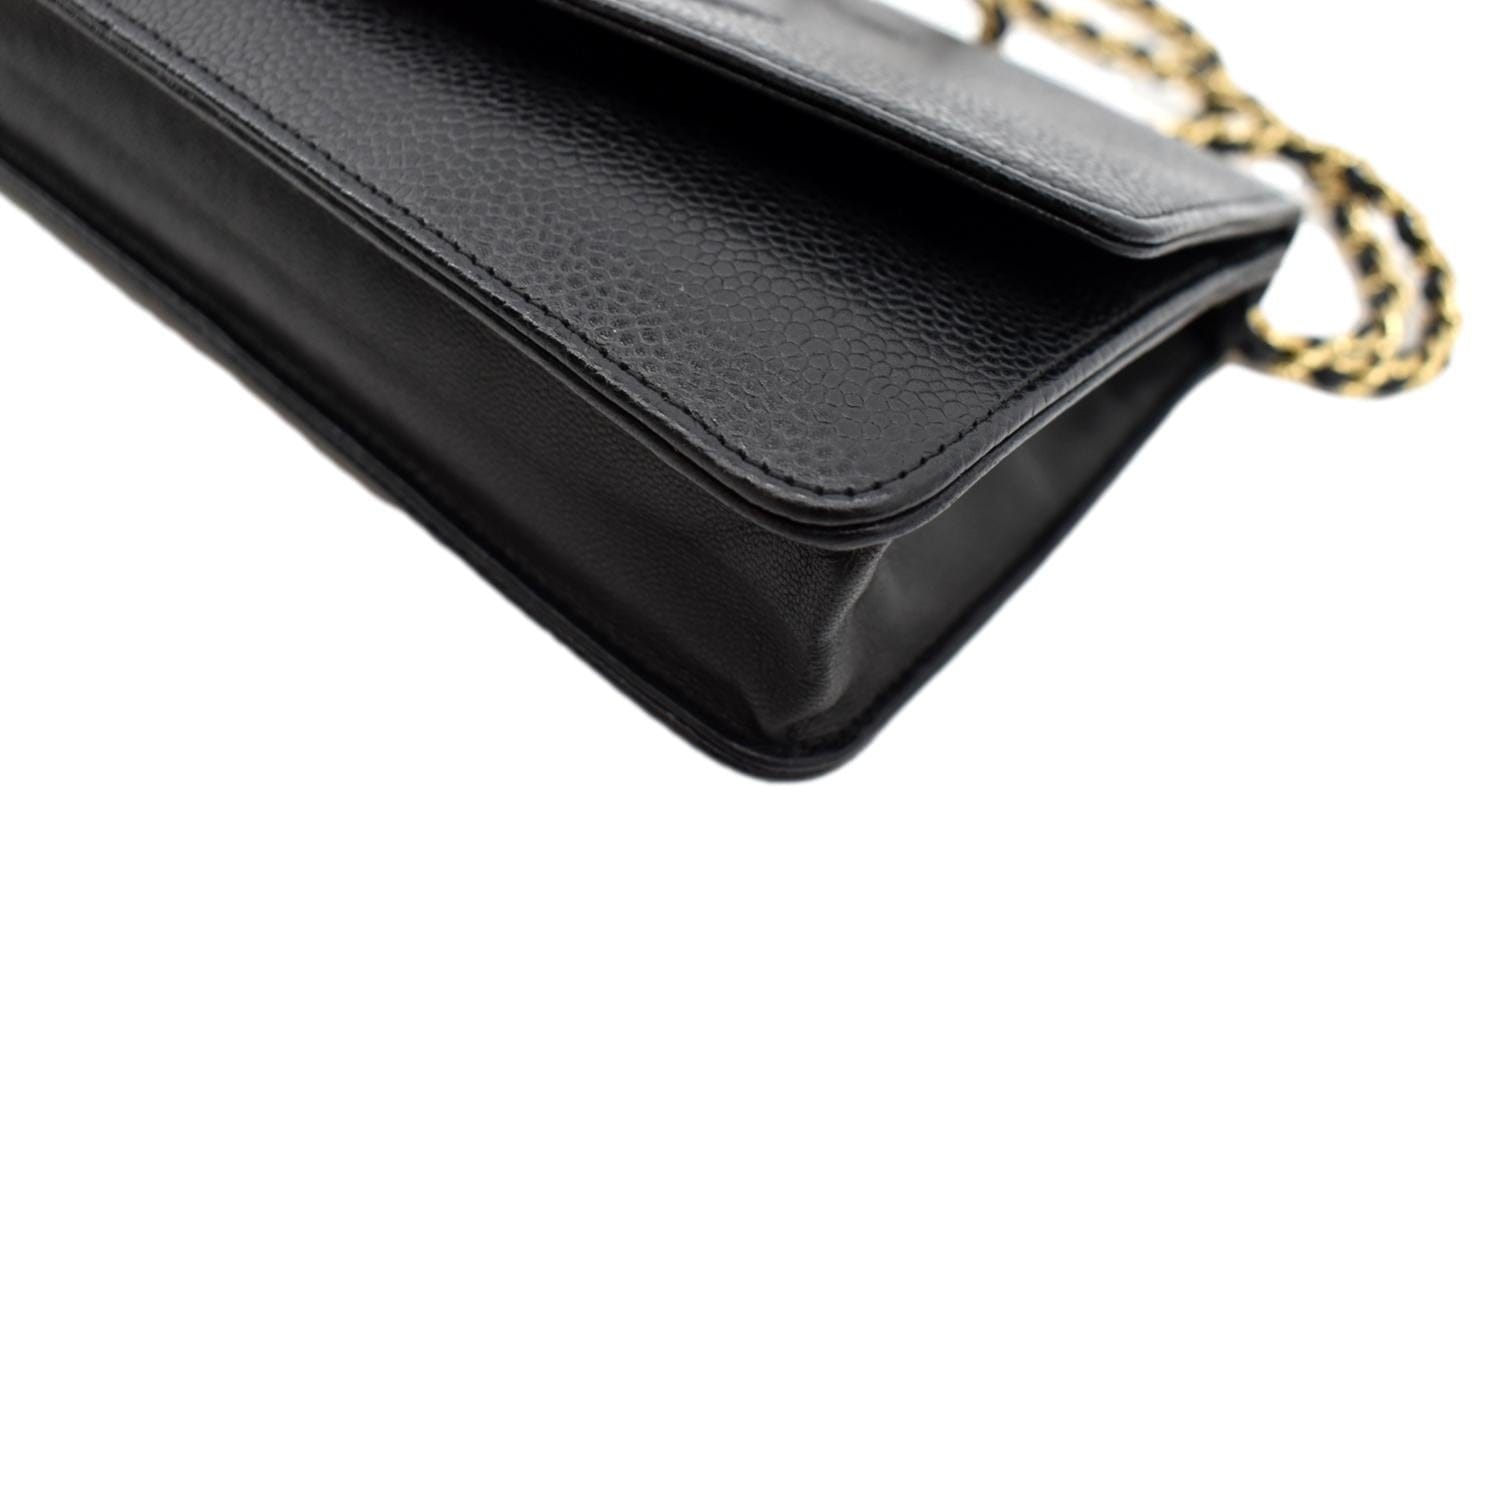 Timeless/classique leather wallet Chanel Black in Leather - 32754224